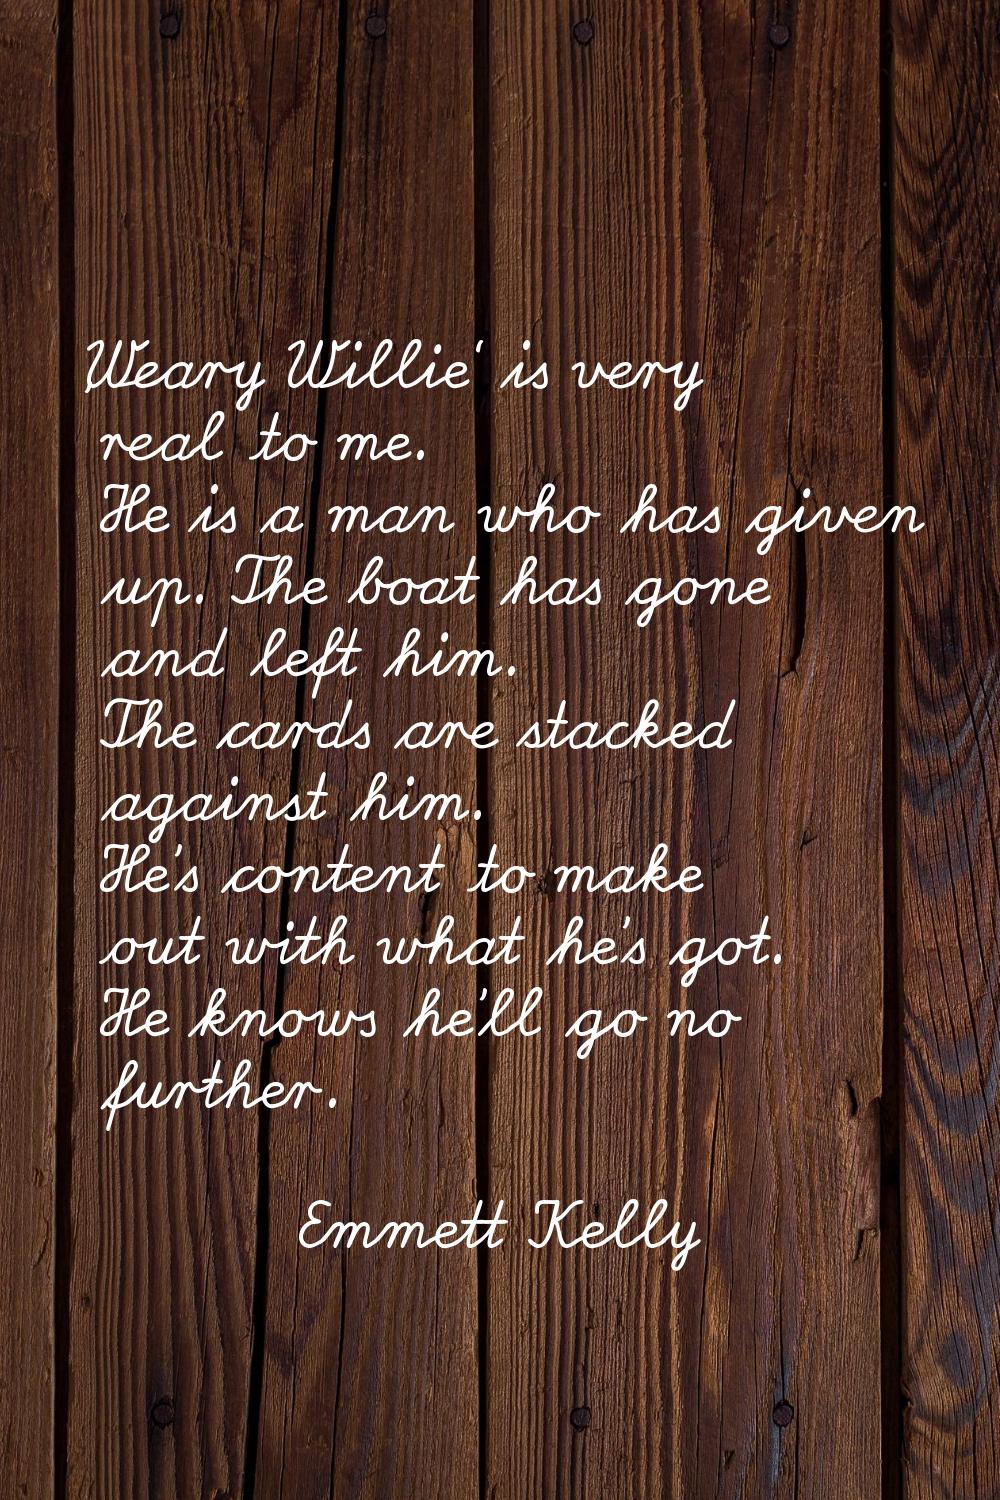 'Weary Willie' is very real to me. He is a man who has given up. The boat has gone and left him. Th